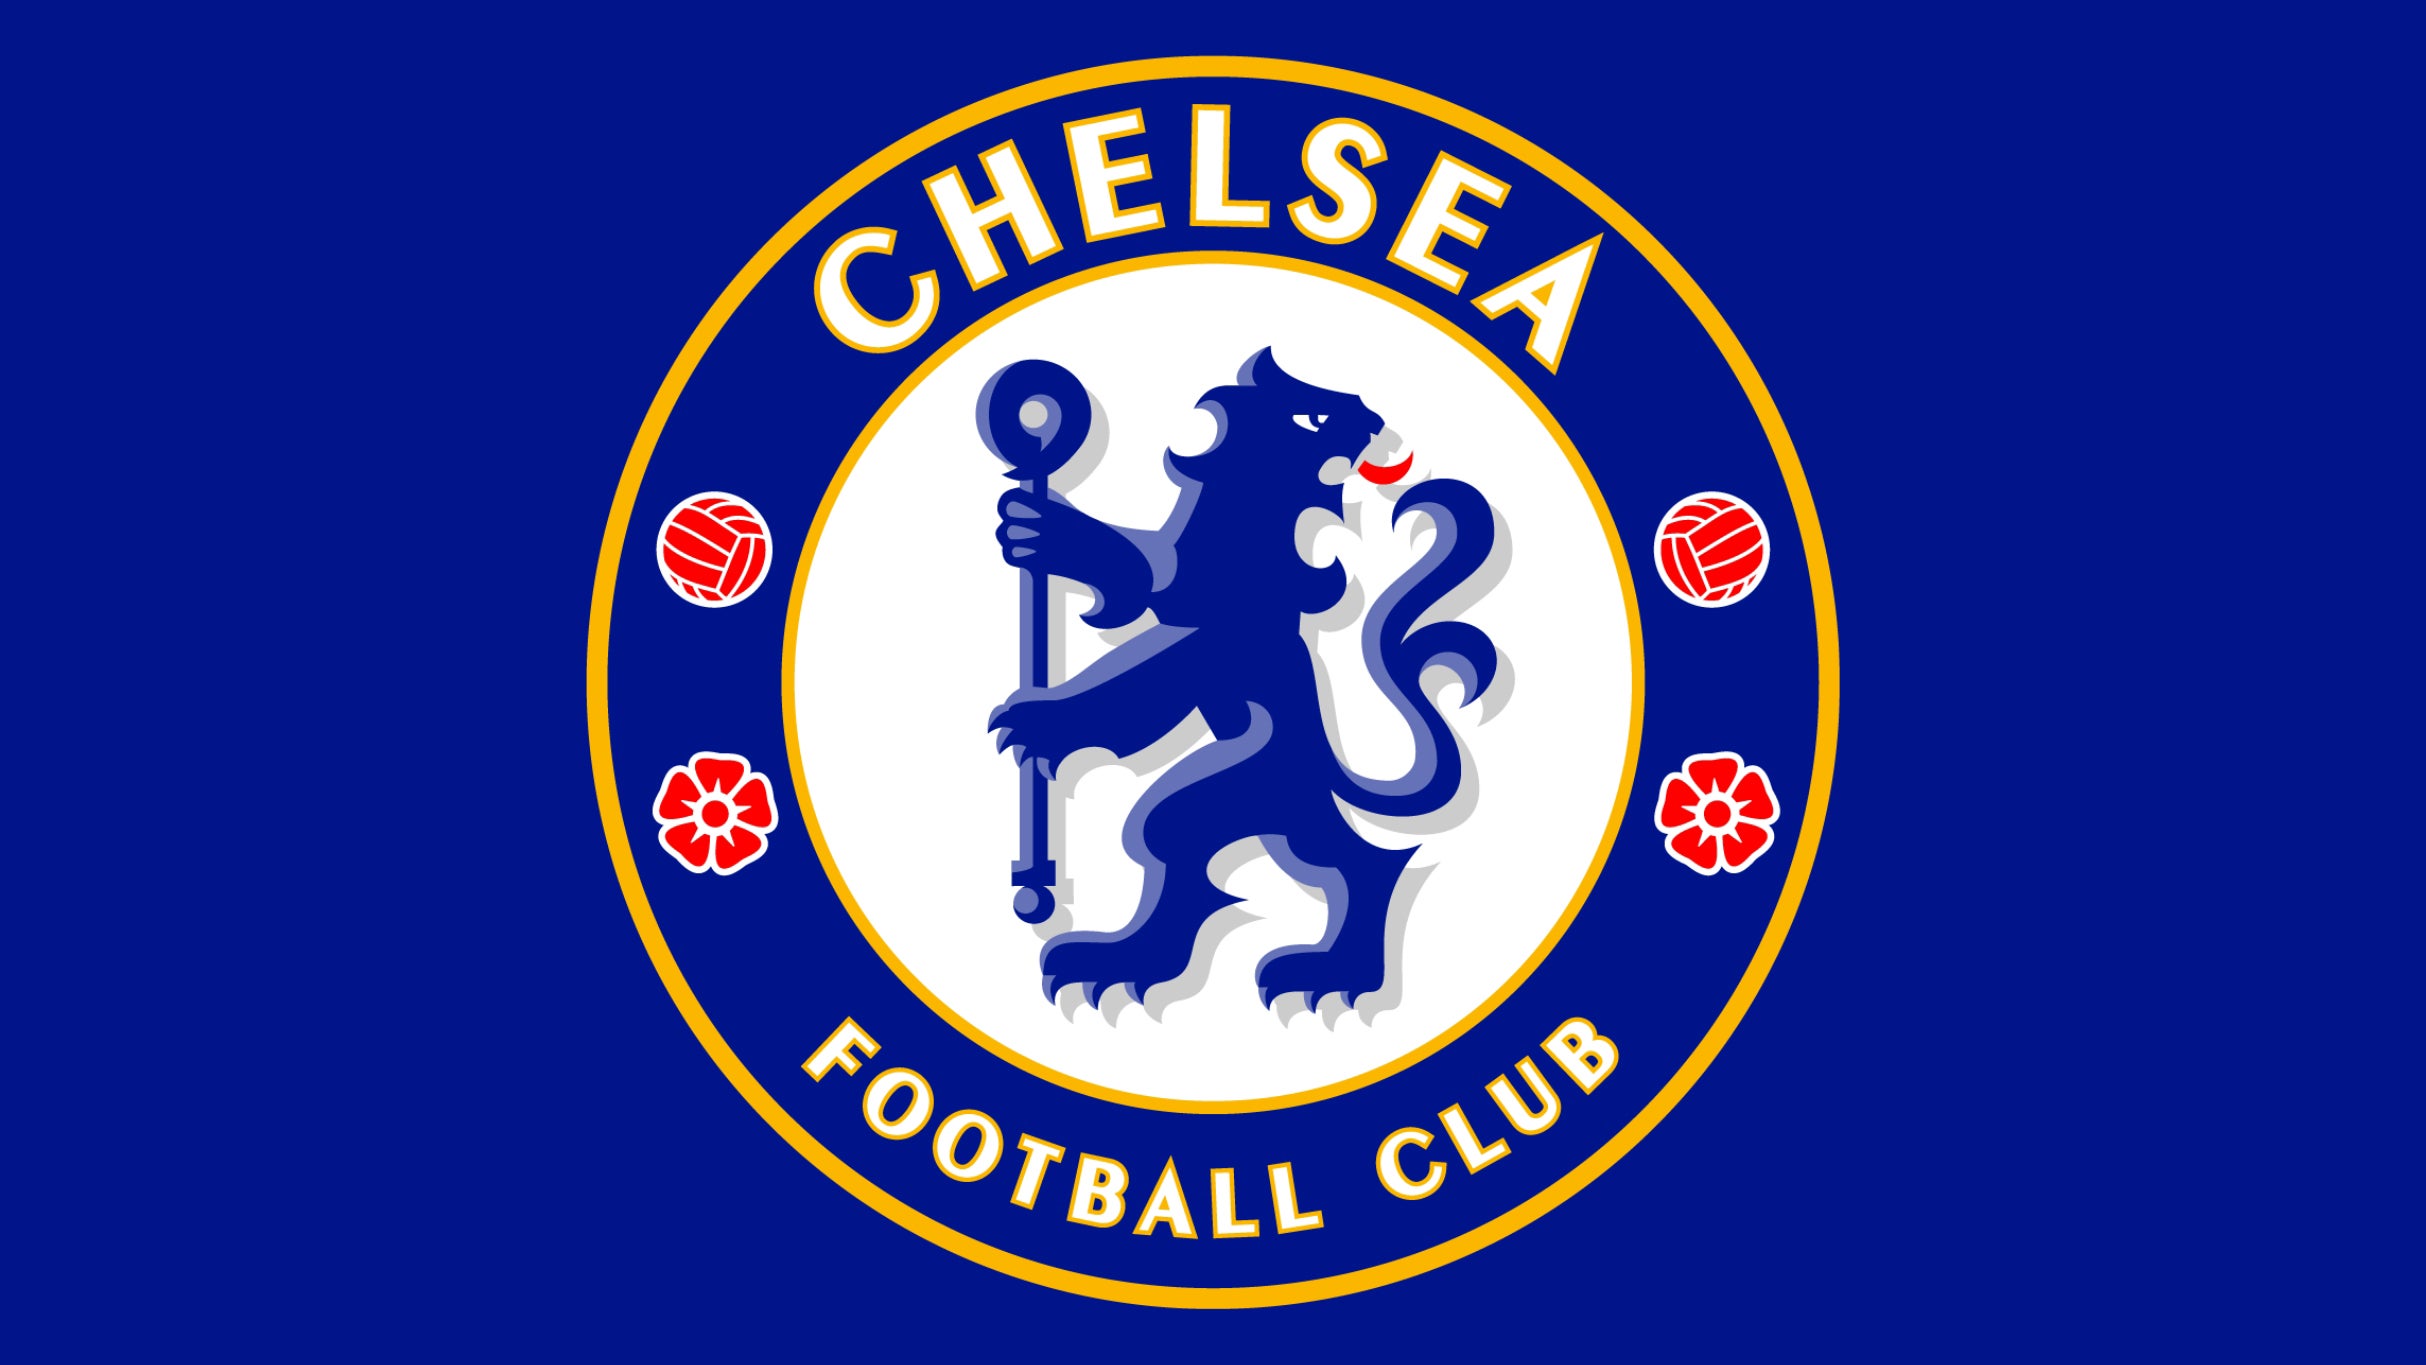 Chelsea vs Manchester City free presale code for show tickets in Columbus, OH (Ohio Stadium)